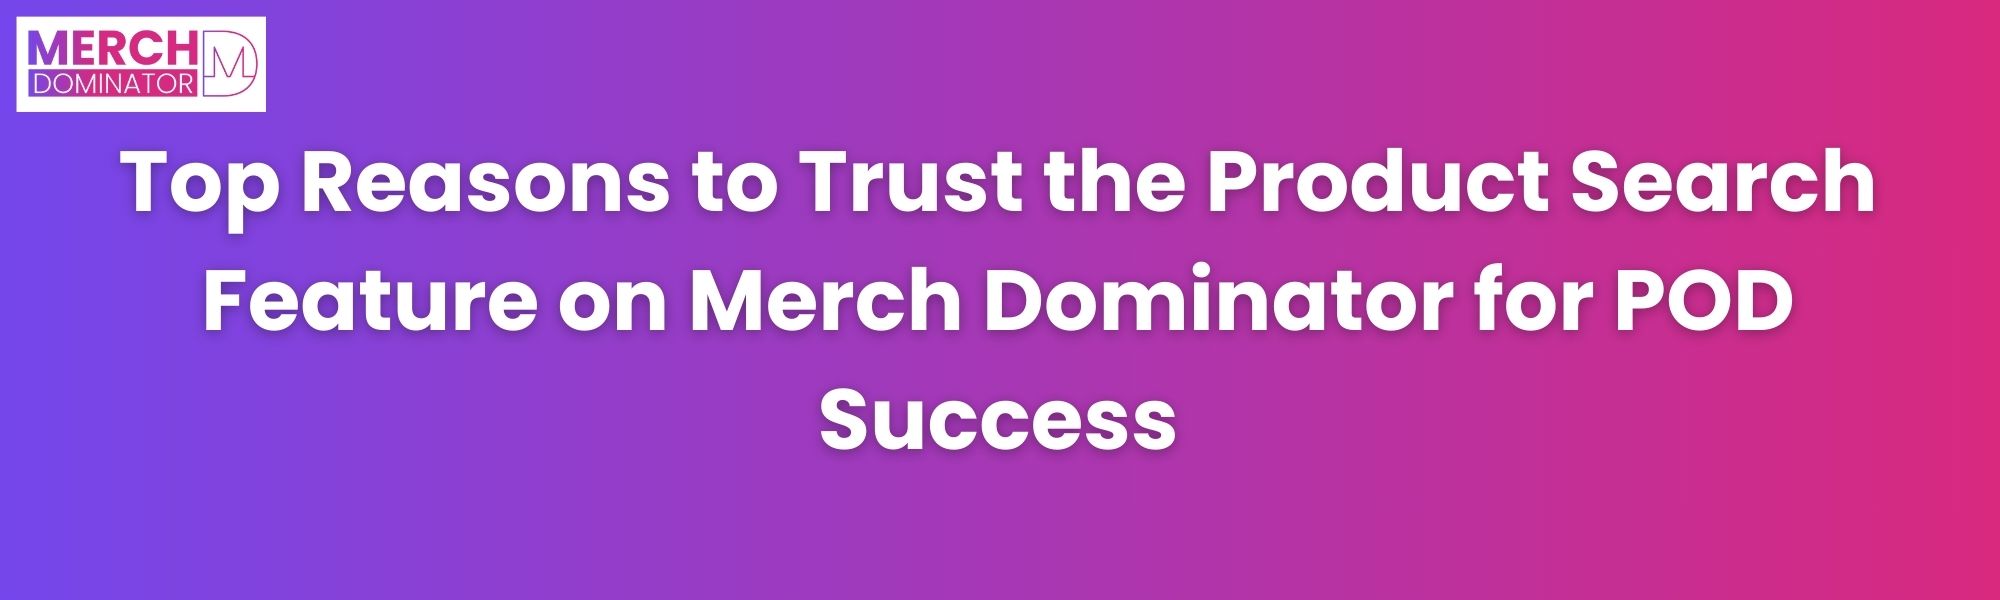 Why Product Search Feature on Merch Dominator is Best